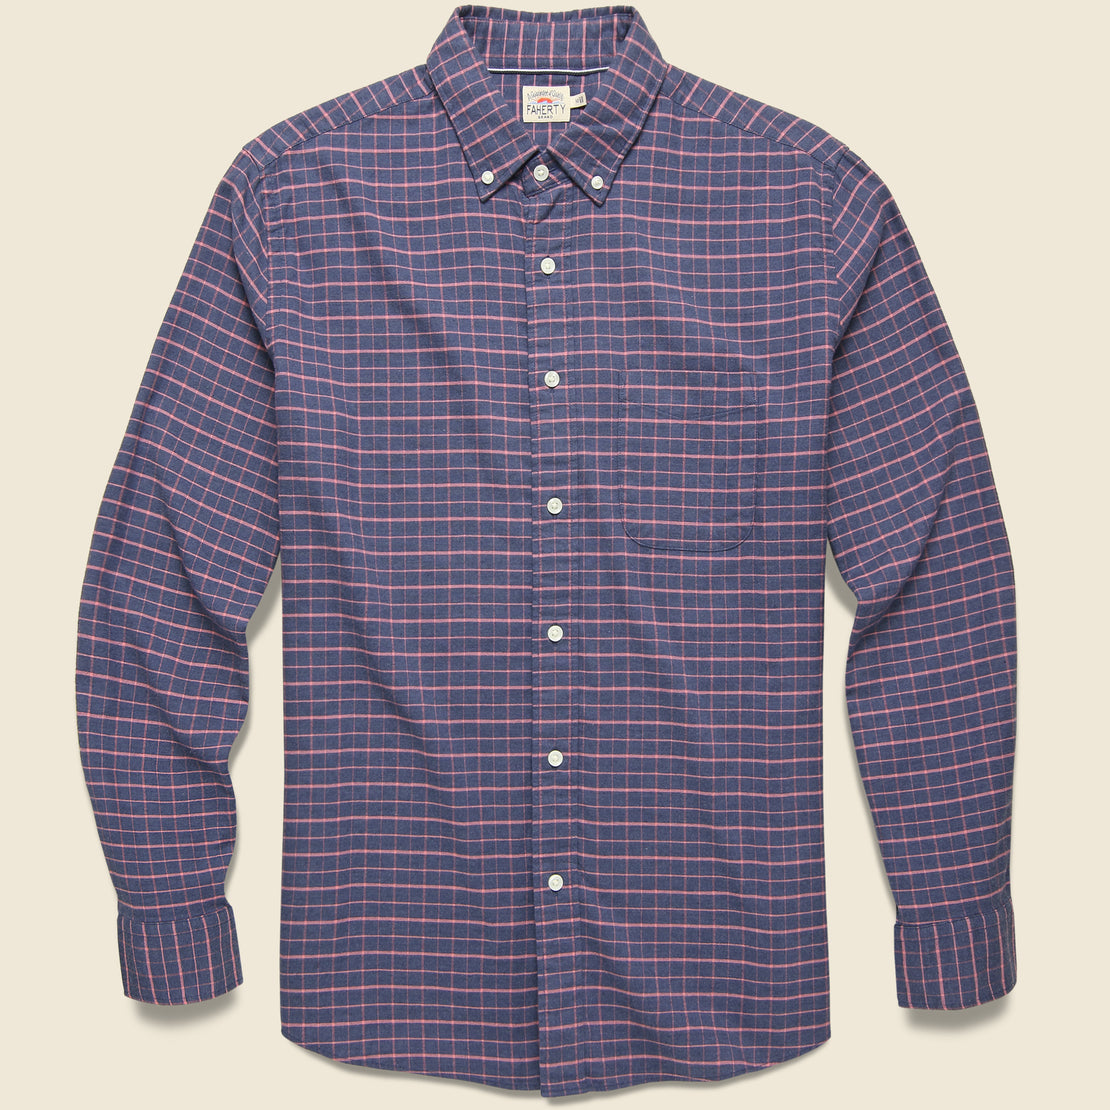 Faherty Stretch Oxford Shirt - Hayes Check